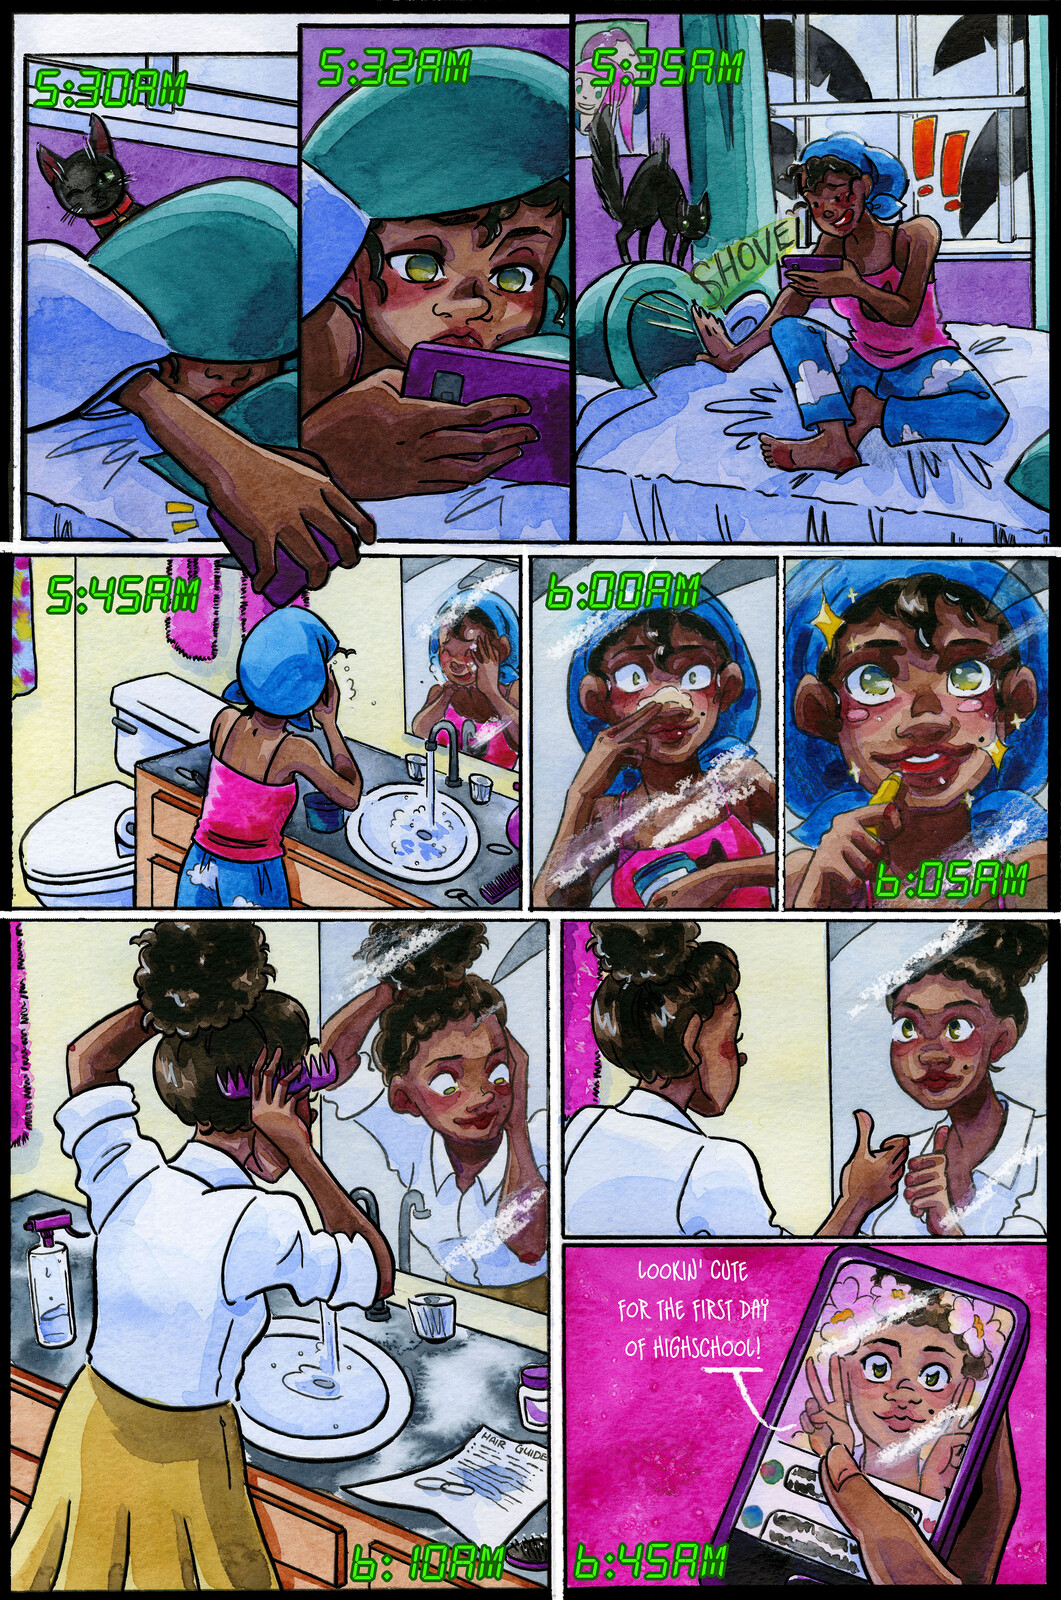 Sample Comic Page from Chapter 9 of 7" Kara